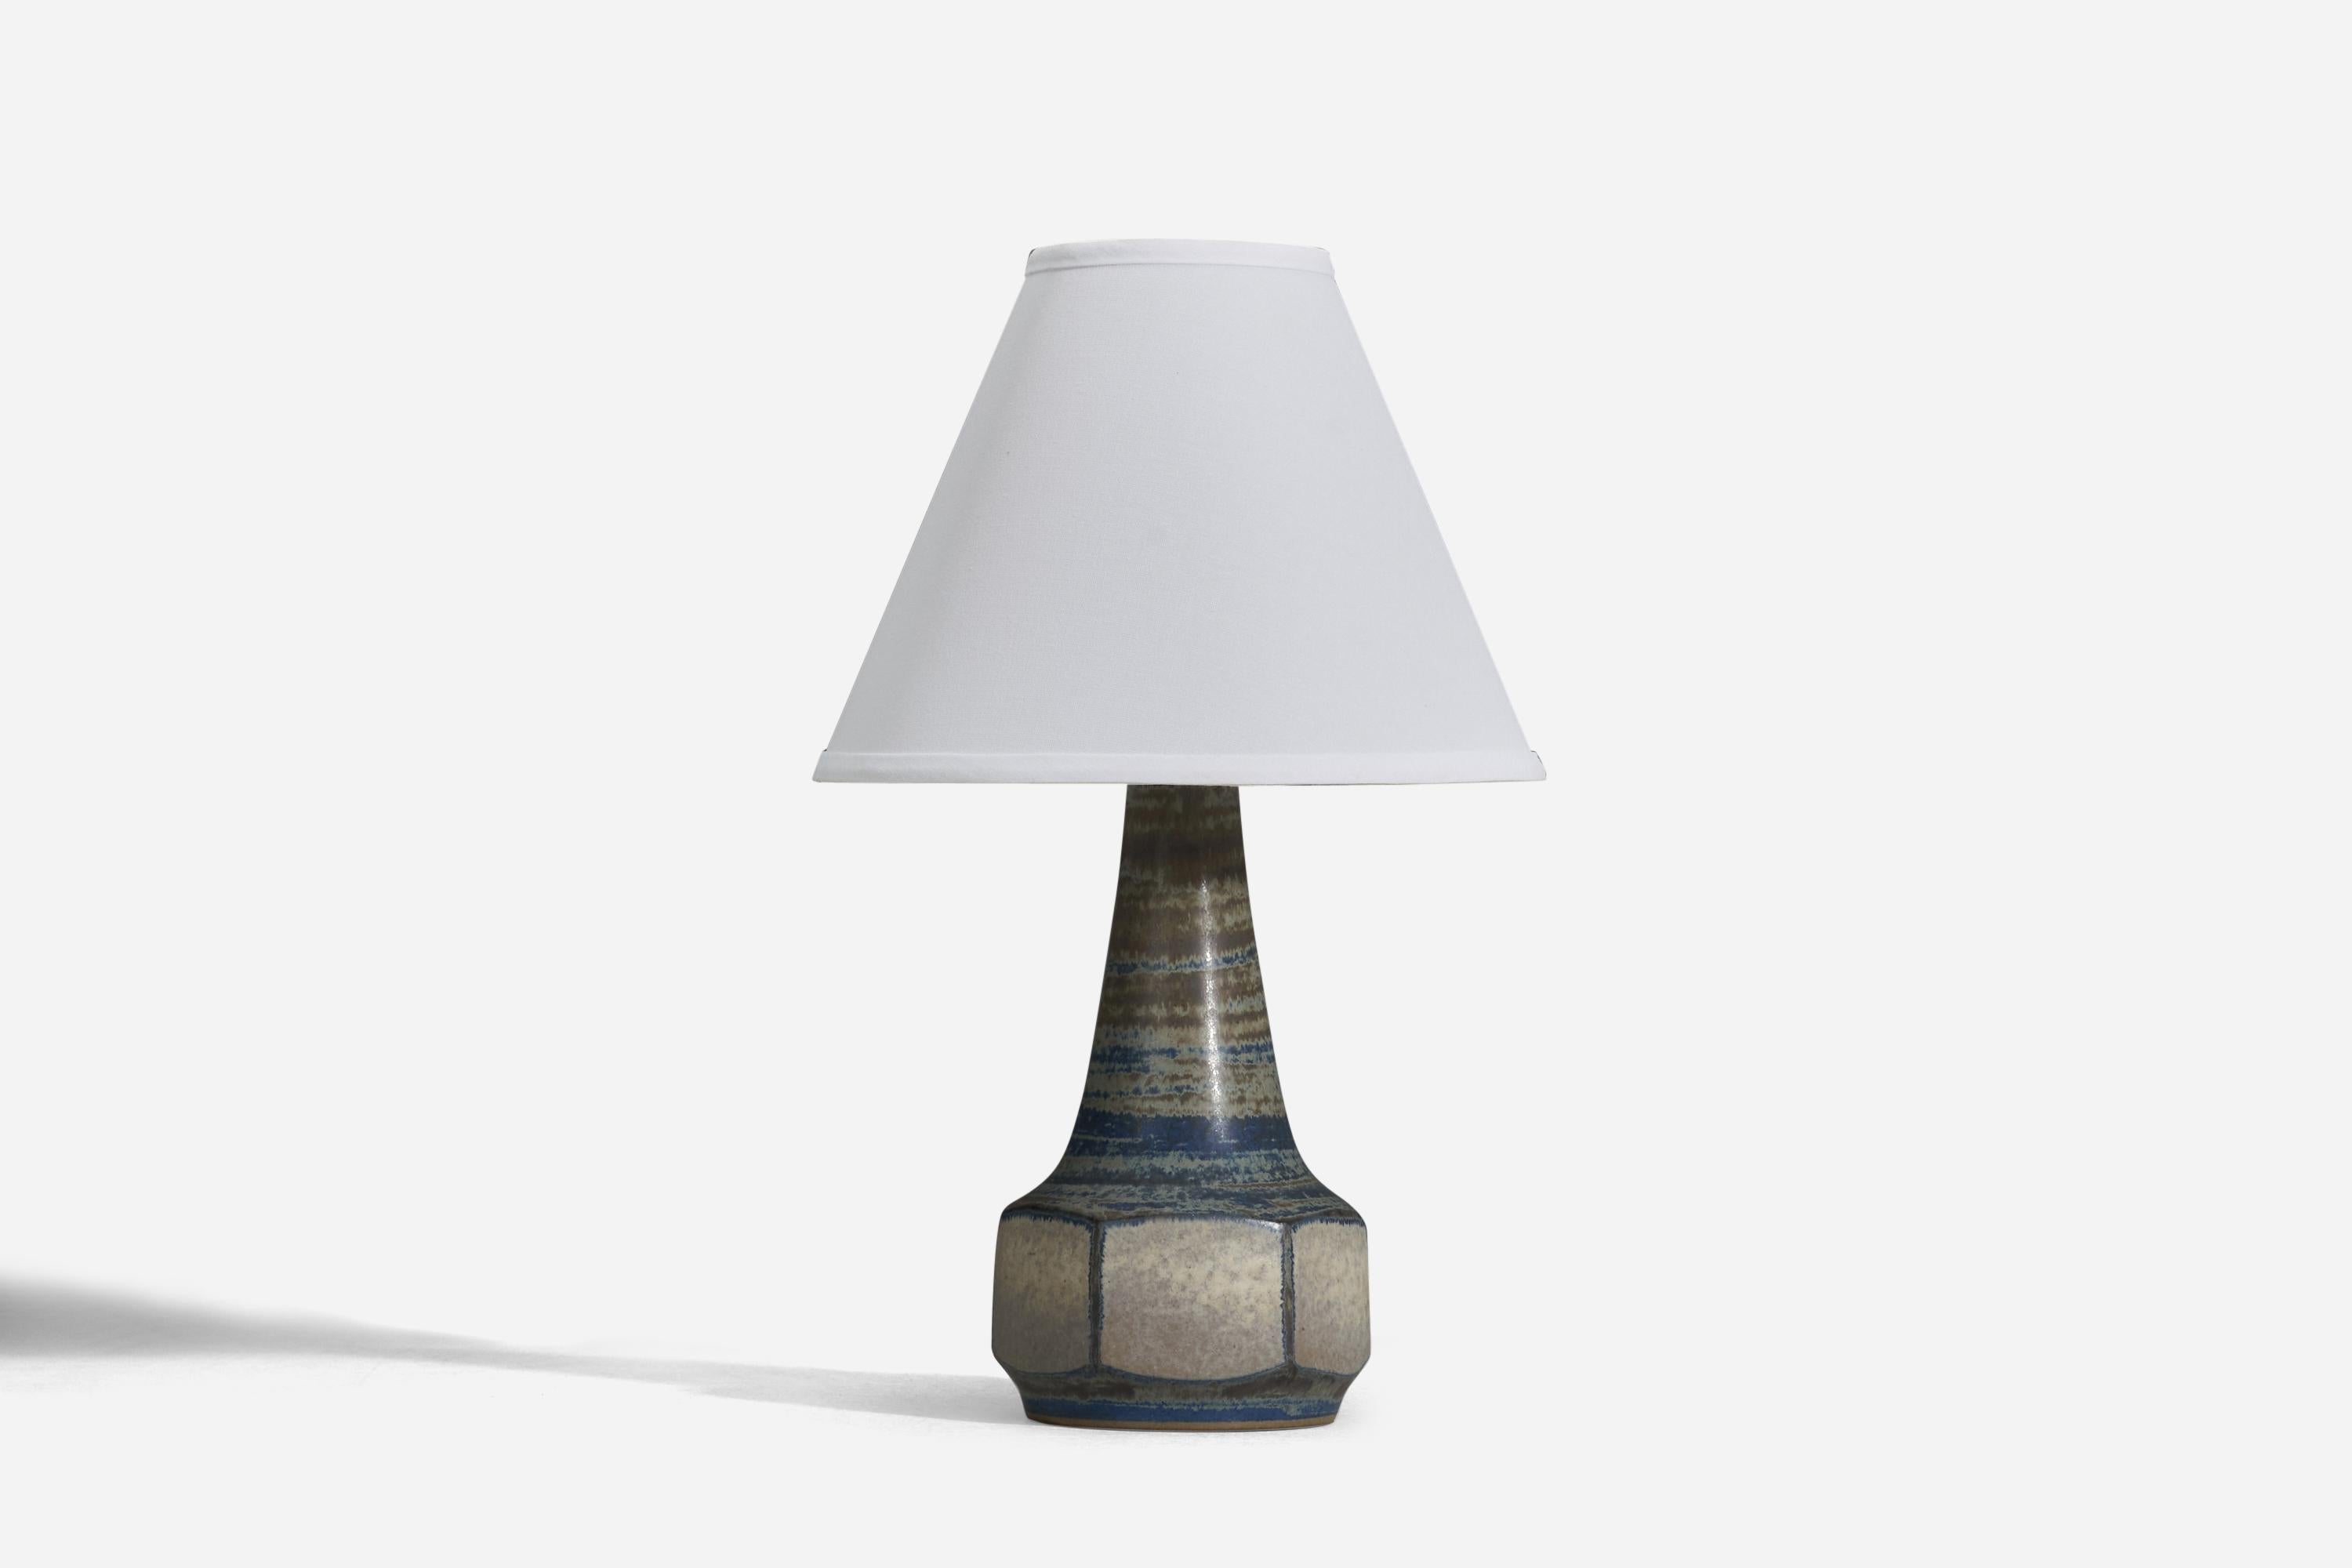 A blue and grey glazed stoneware table lamp designed by Marianne Starck and produced by Michael Andersen, Denmark, 1960s.

Sold without Lampshade
Dimensions of Lamp (inches) : 12.18 x 5.28 x 5.28 (Height x Width x Depth)
Dimensions of Lampshade